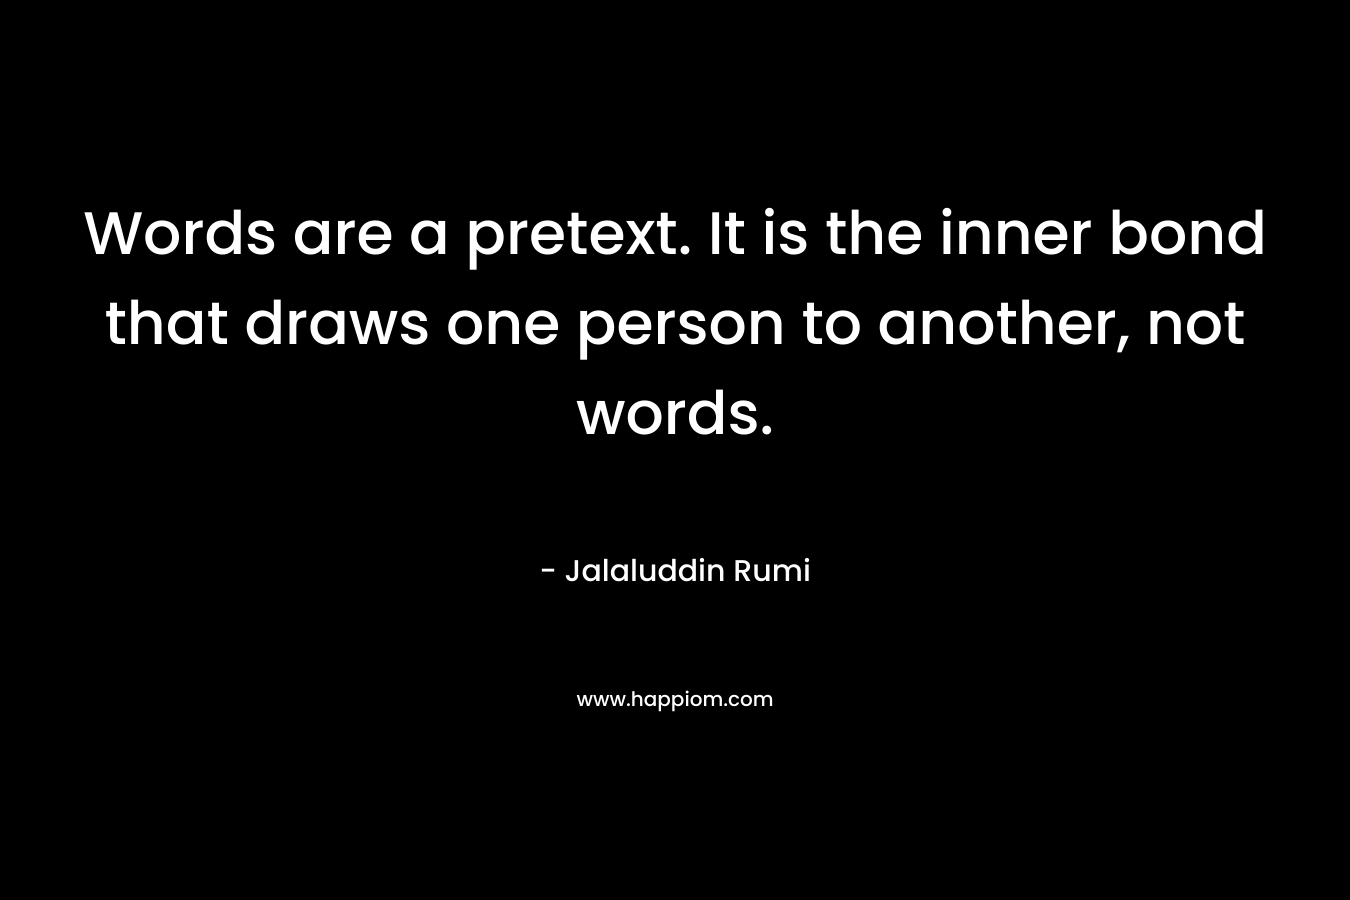 Words are a pretext. It is the inner bond that draws one person to another, not words.